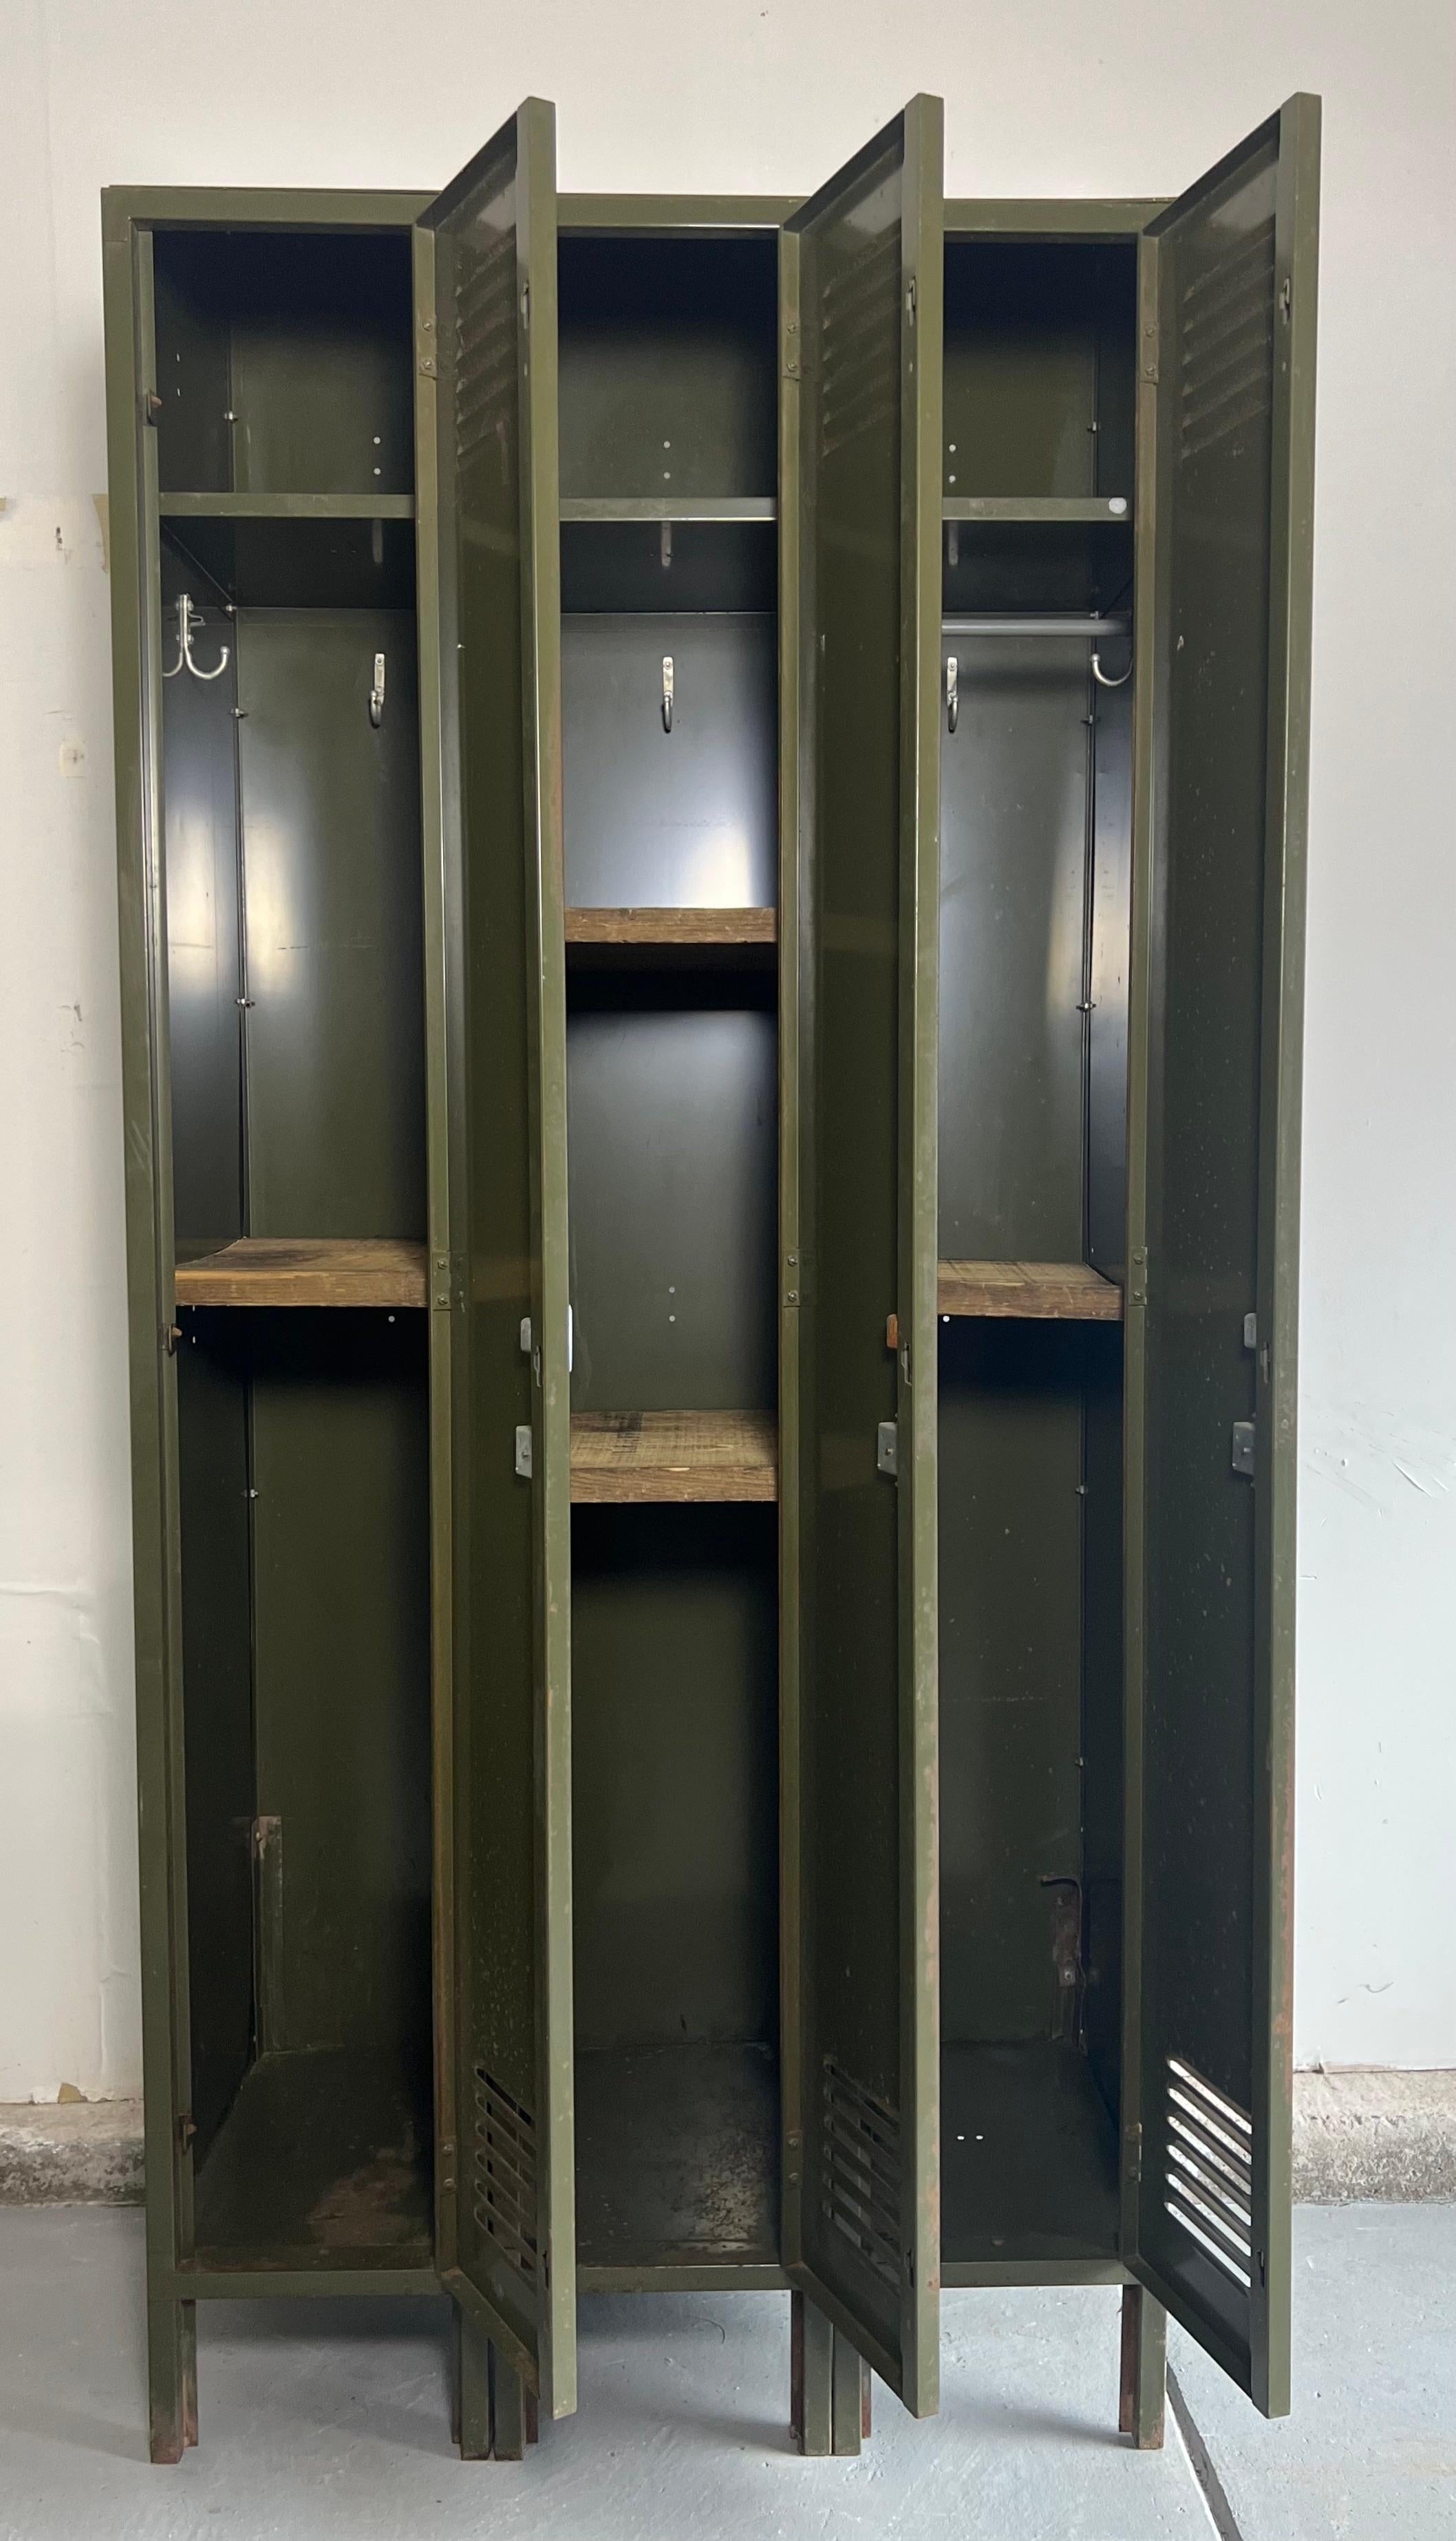 Vintage Industrial Steel Three Door Locker with Shelves and Slope Top by Lyon In Good Condition For Sale In Doylestown, PA